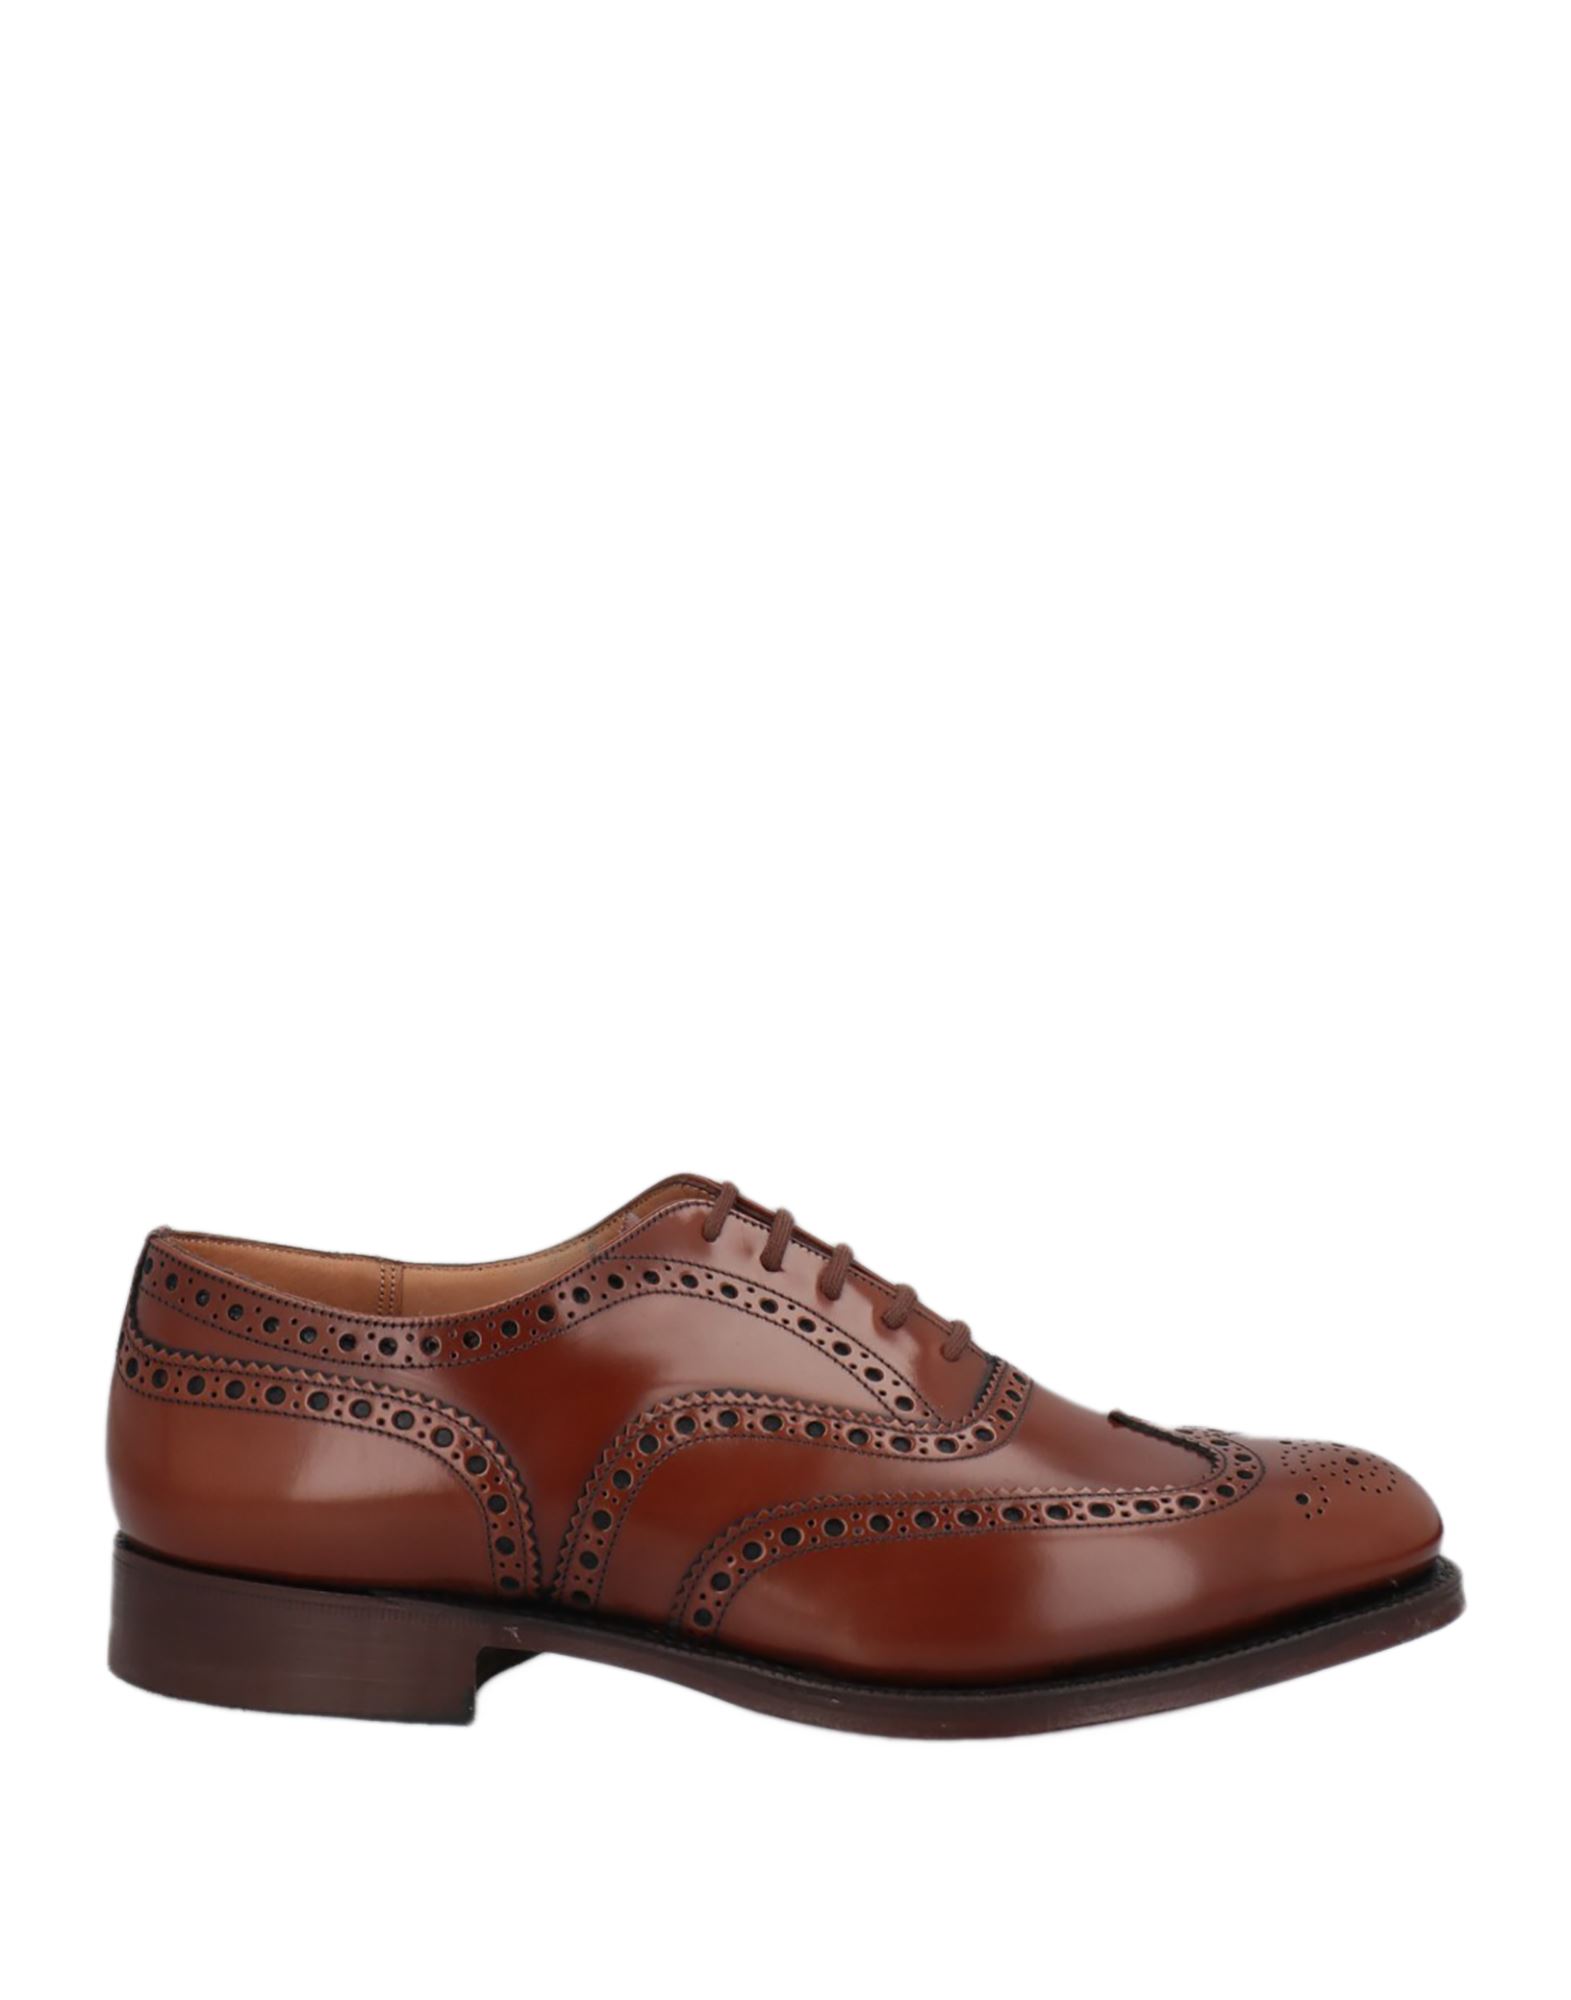 CHURCH'S LACE-UP SHOES